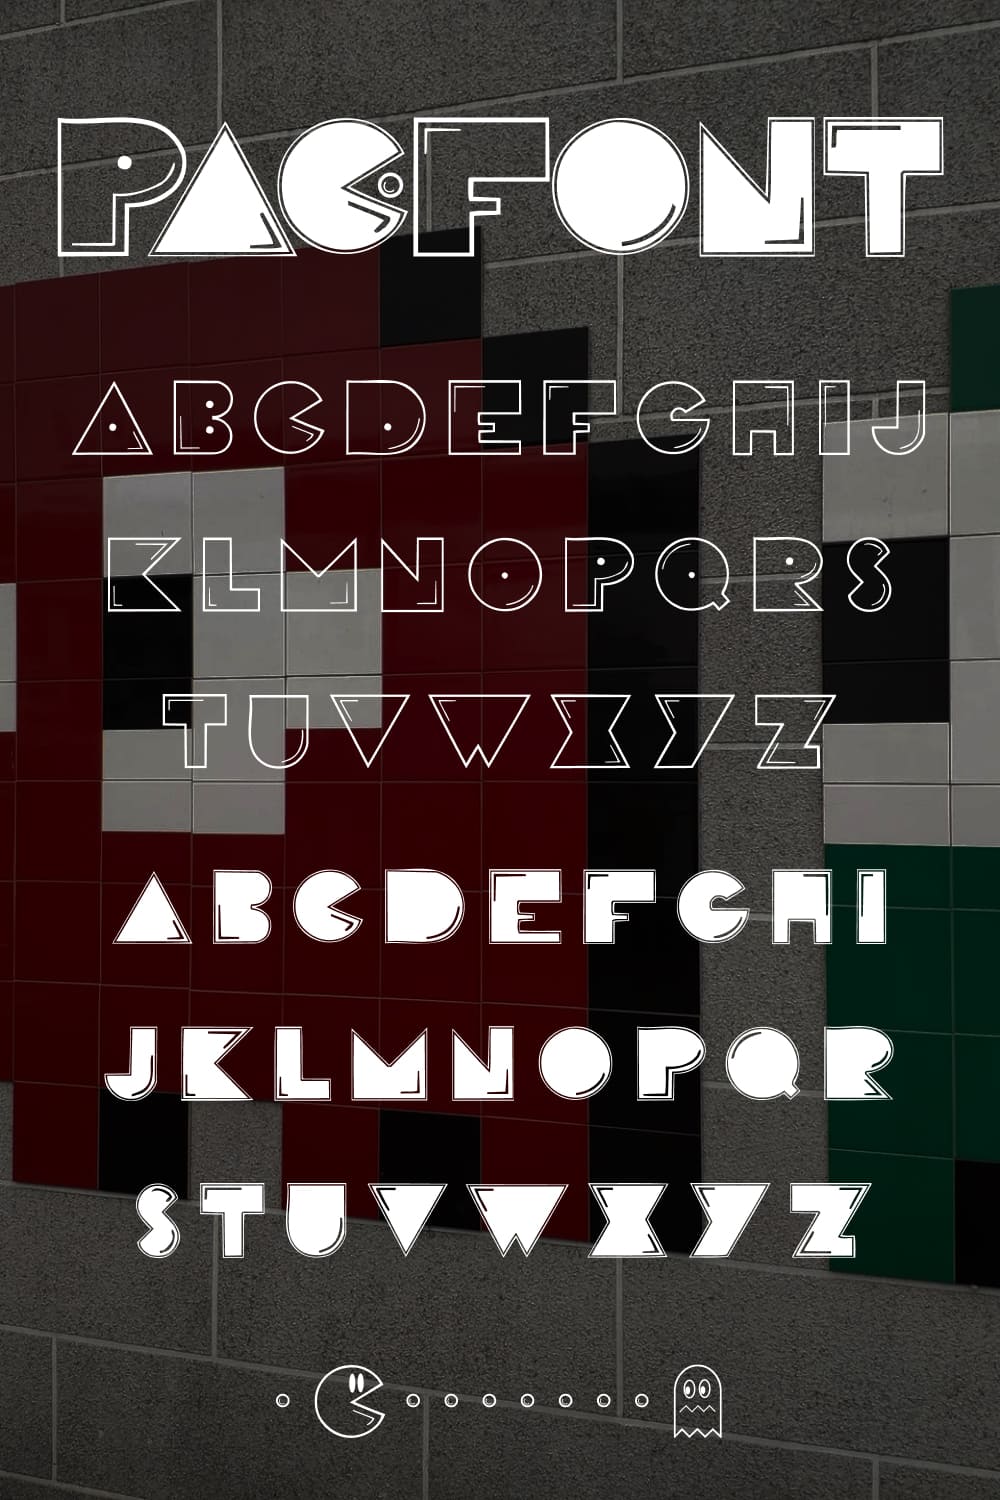 A creative font that has no clear lines and borders.